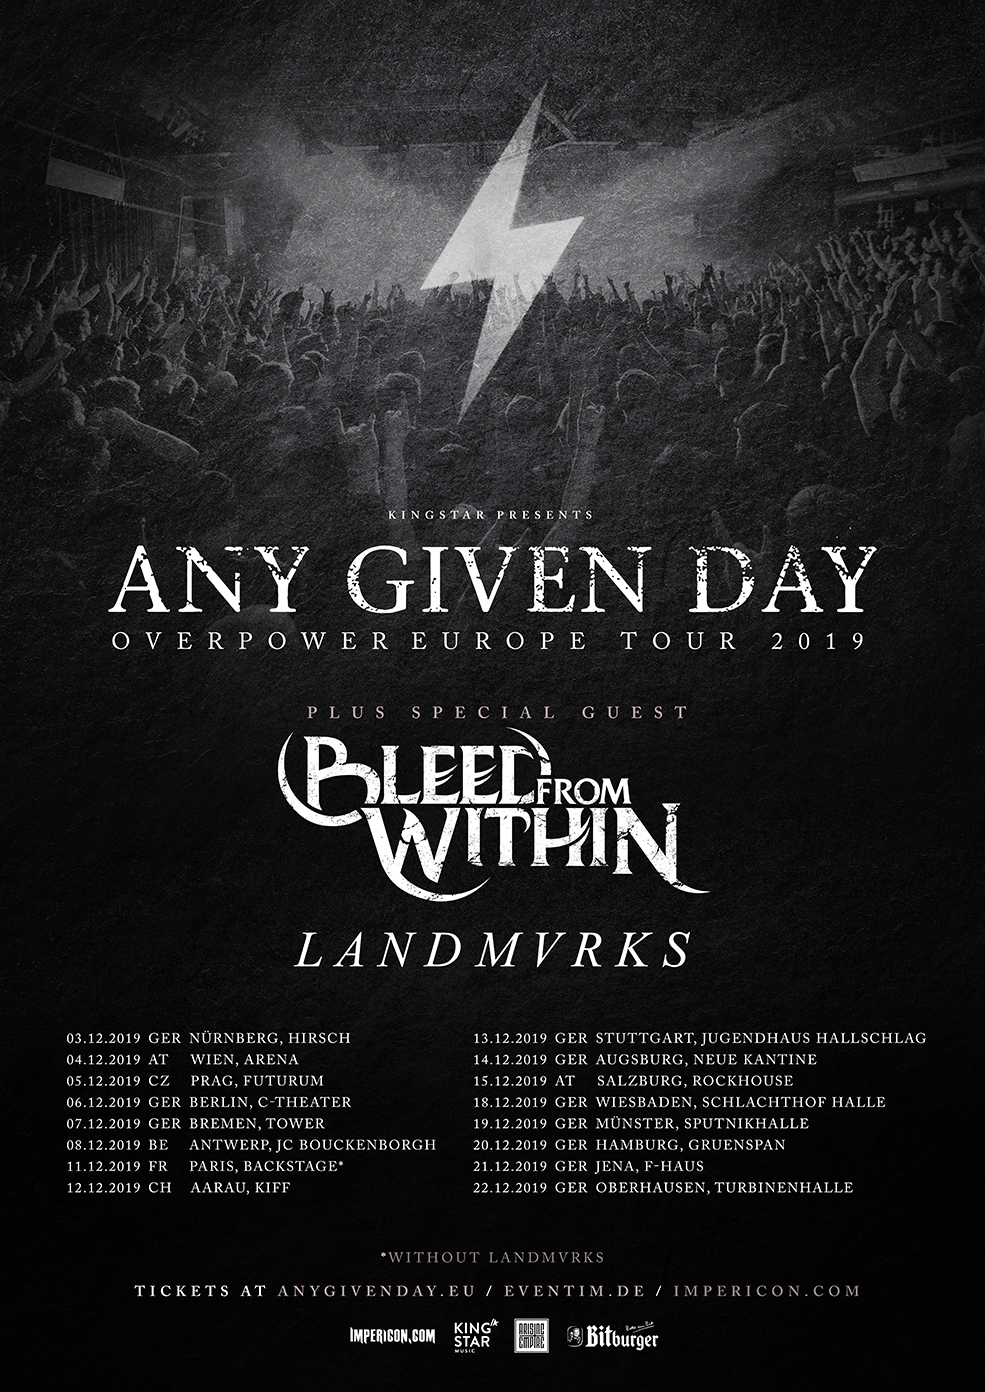 Any Given Day - Overpower Europe Tour 2019